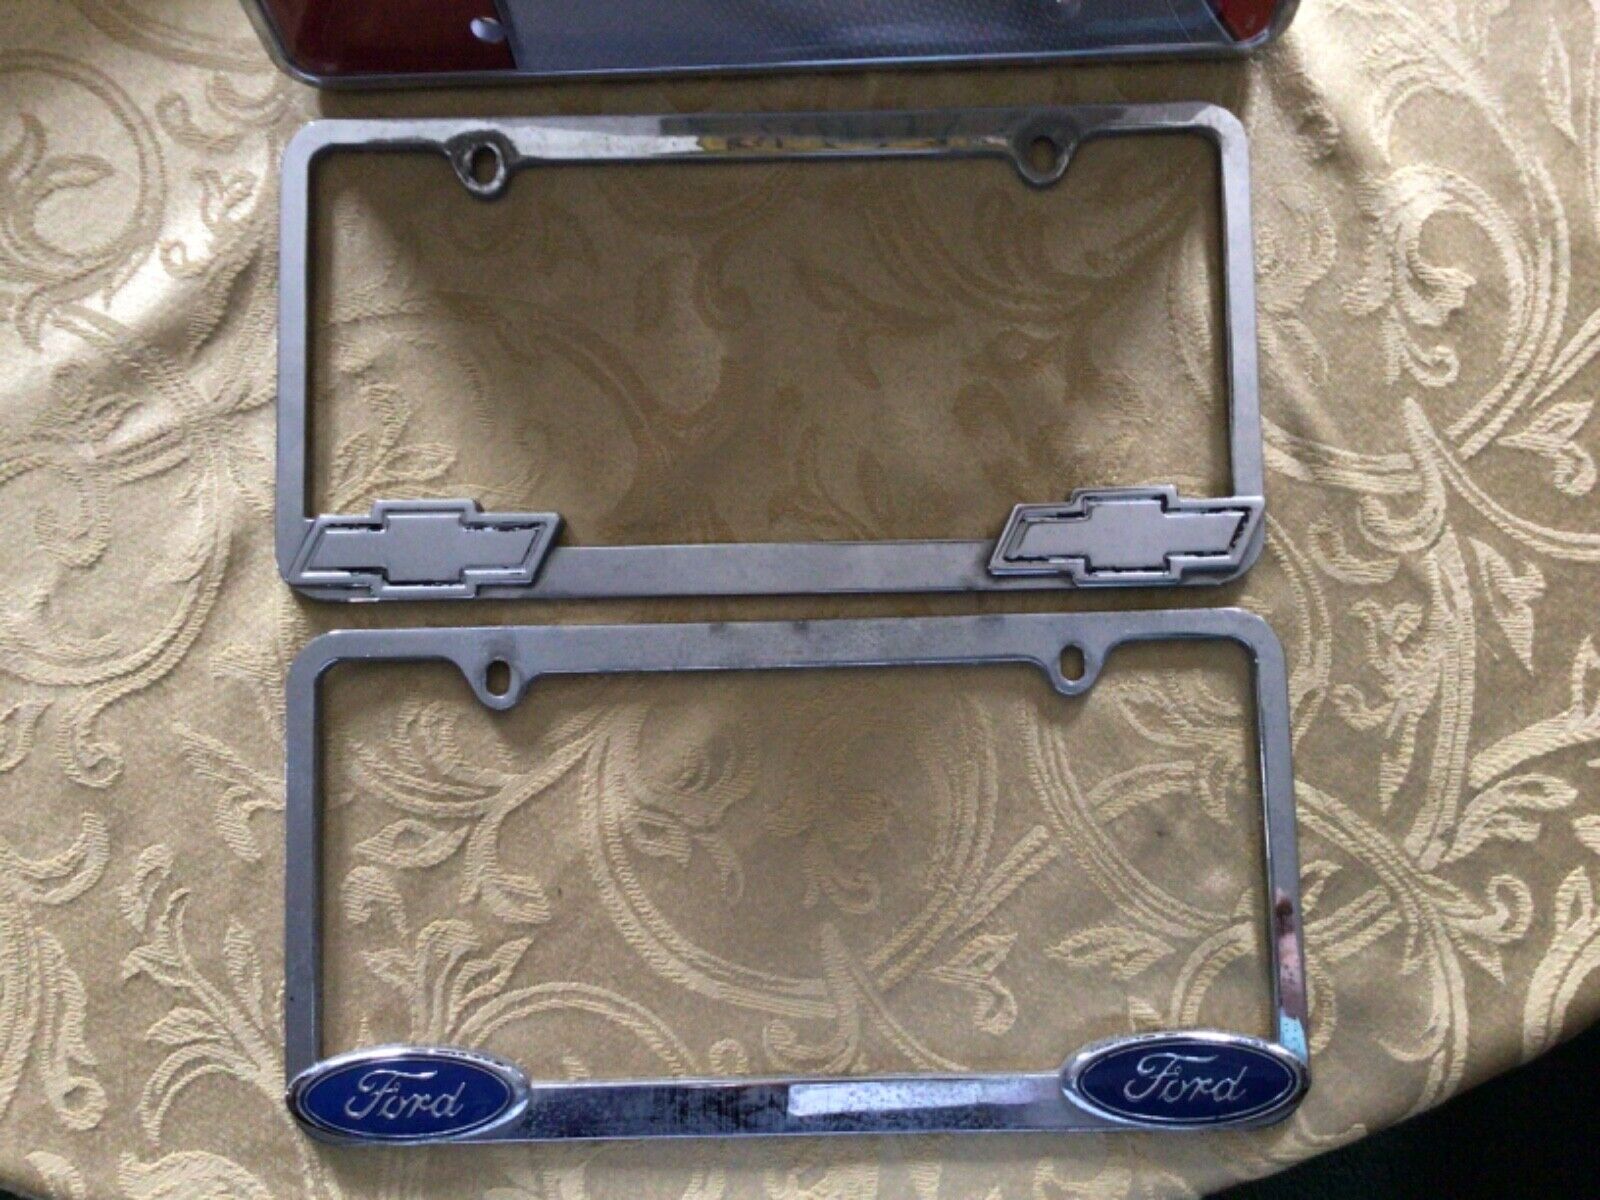 2 Vintage License Plate Holders Ford & Chevy Chevrolet